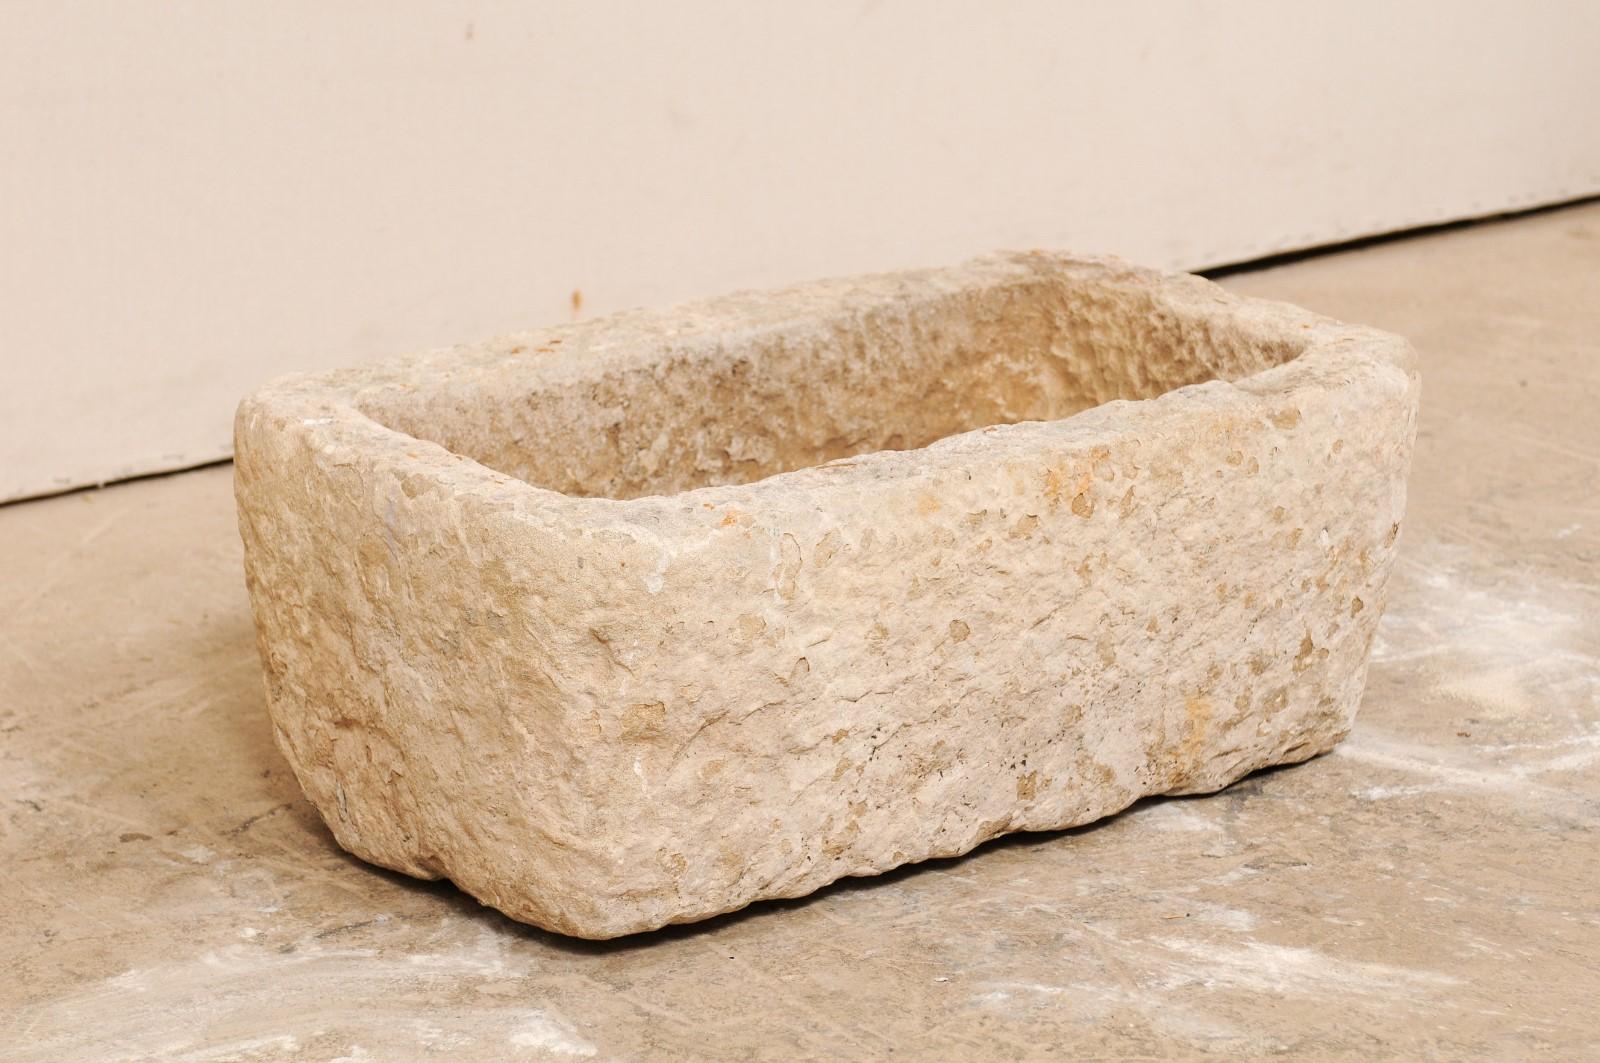 A Spanish stone trough from the 19th century. This antique rectangular-shaped trough from Spain has been carved out of a single piece of stone. It is both beautiful and rustic, simplistic in design. A delightful element to enhance any landscape.